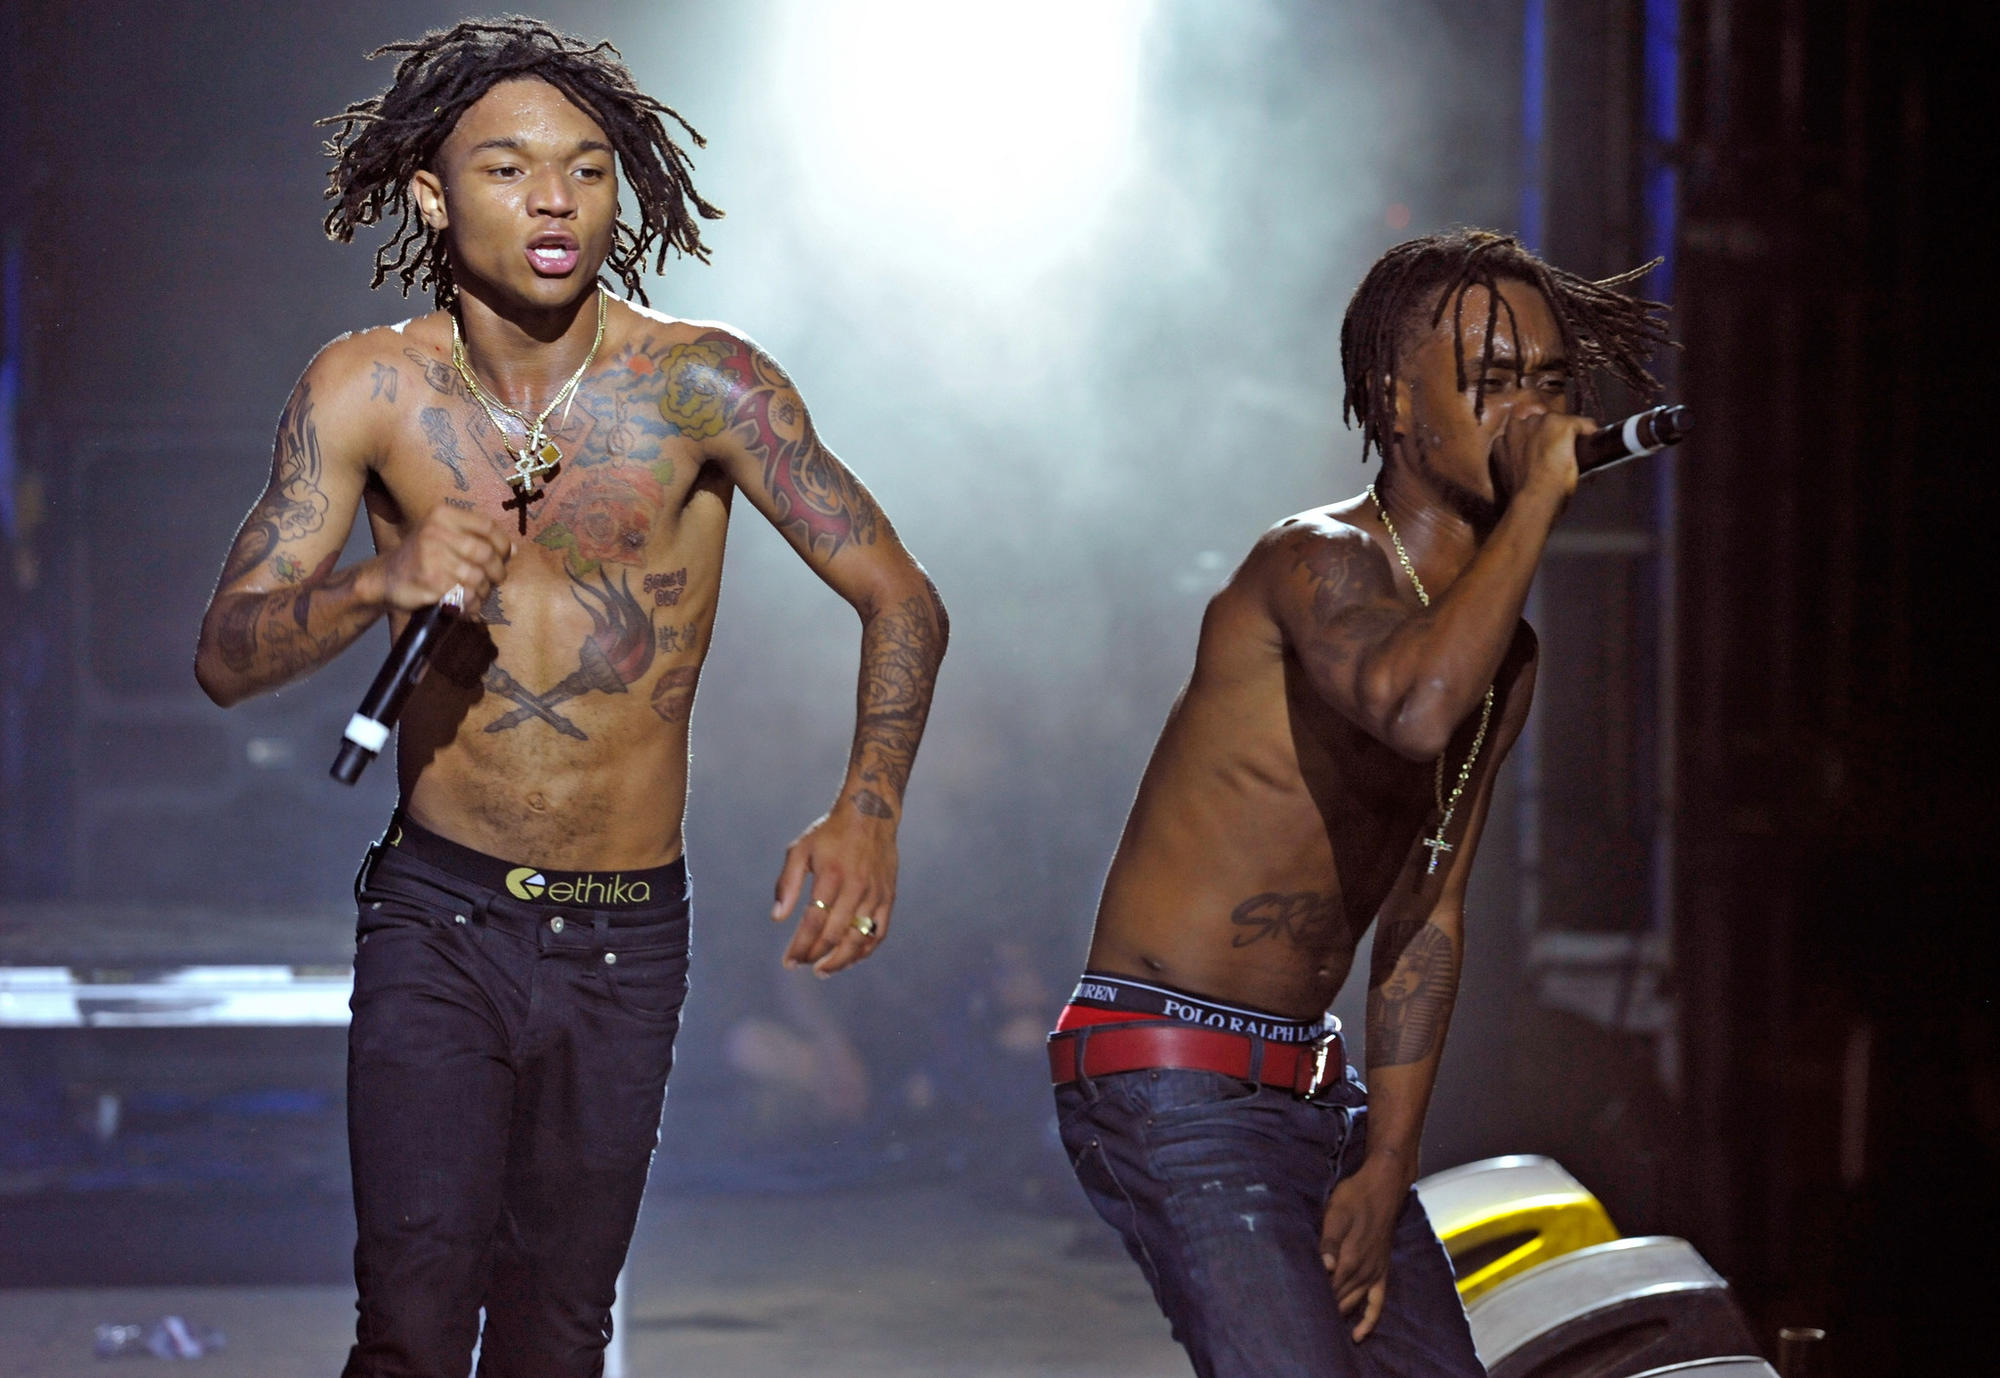 Swae Lee, left, and Slim Jimmy of Rae Sremmurd perform at the Coachella Valley Music and Arts Festival on April 22.